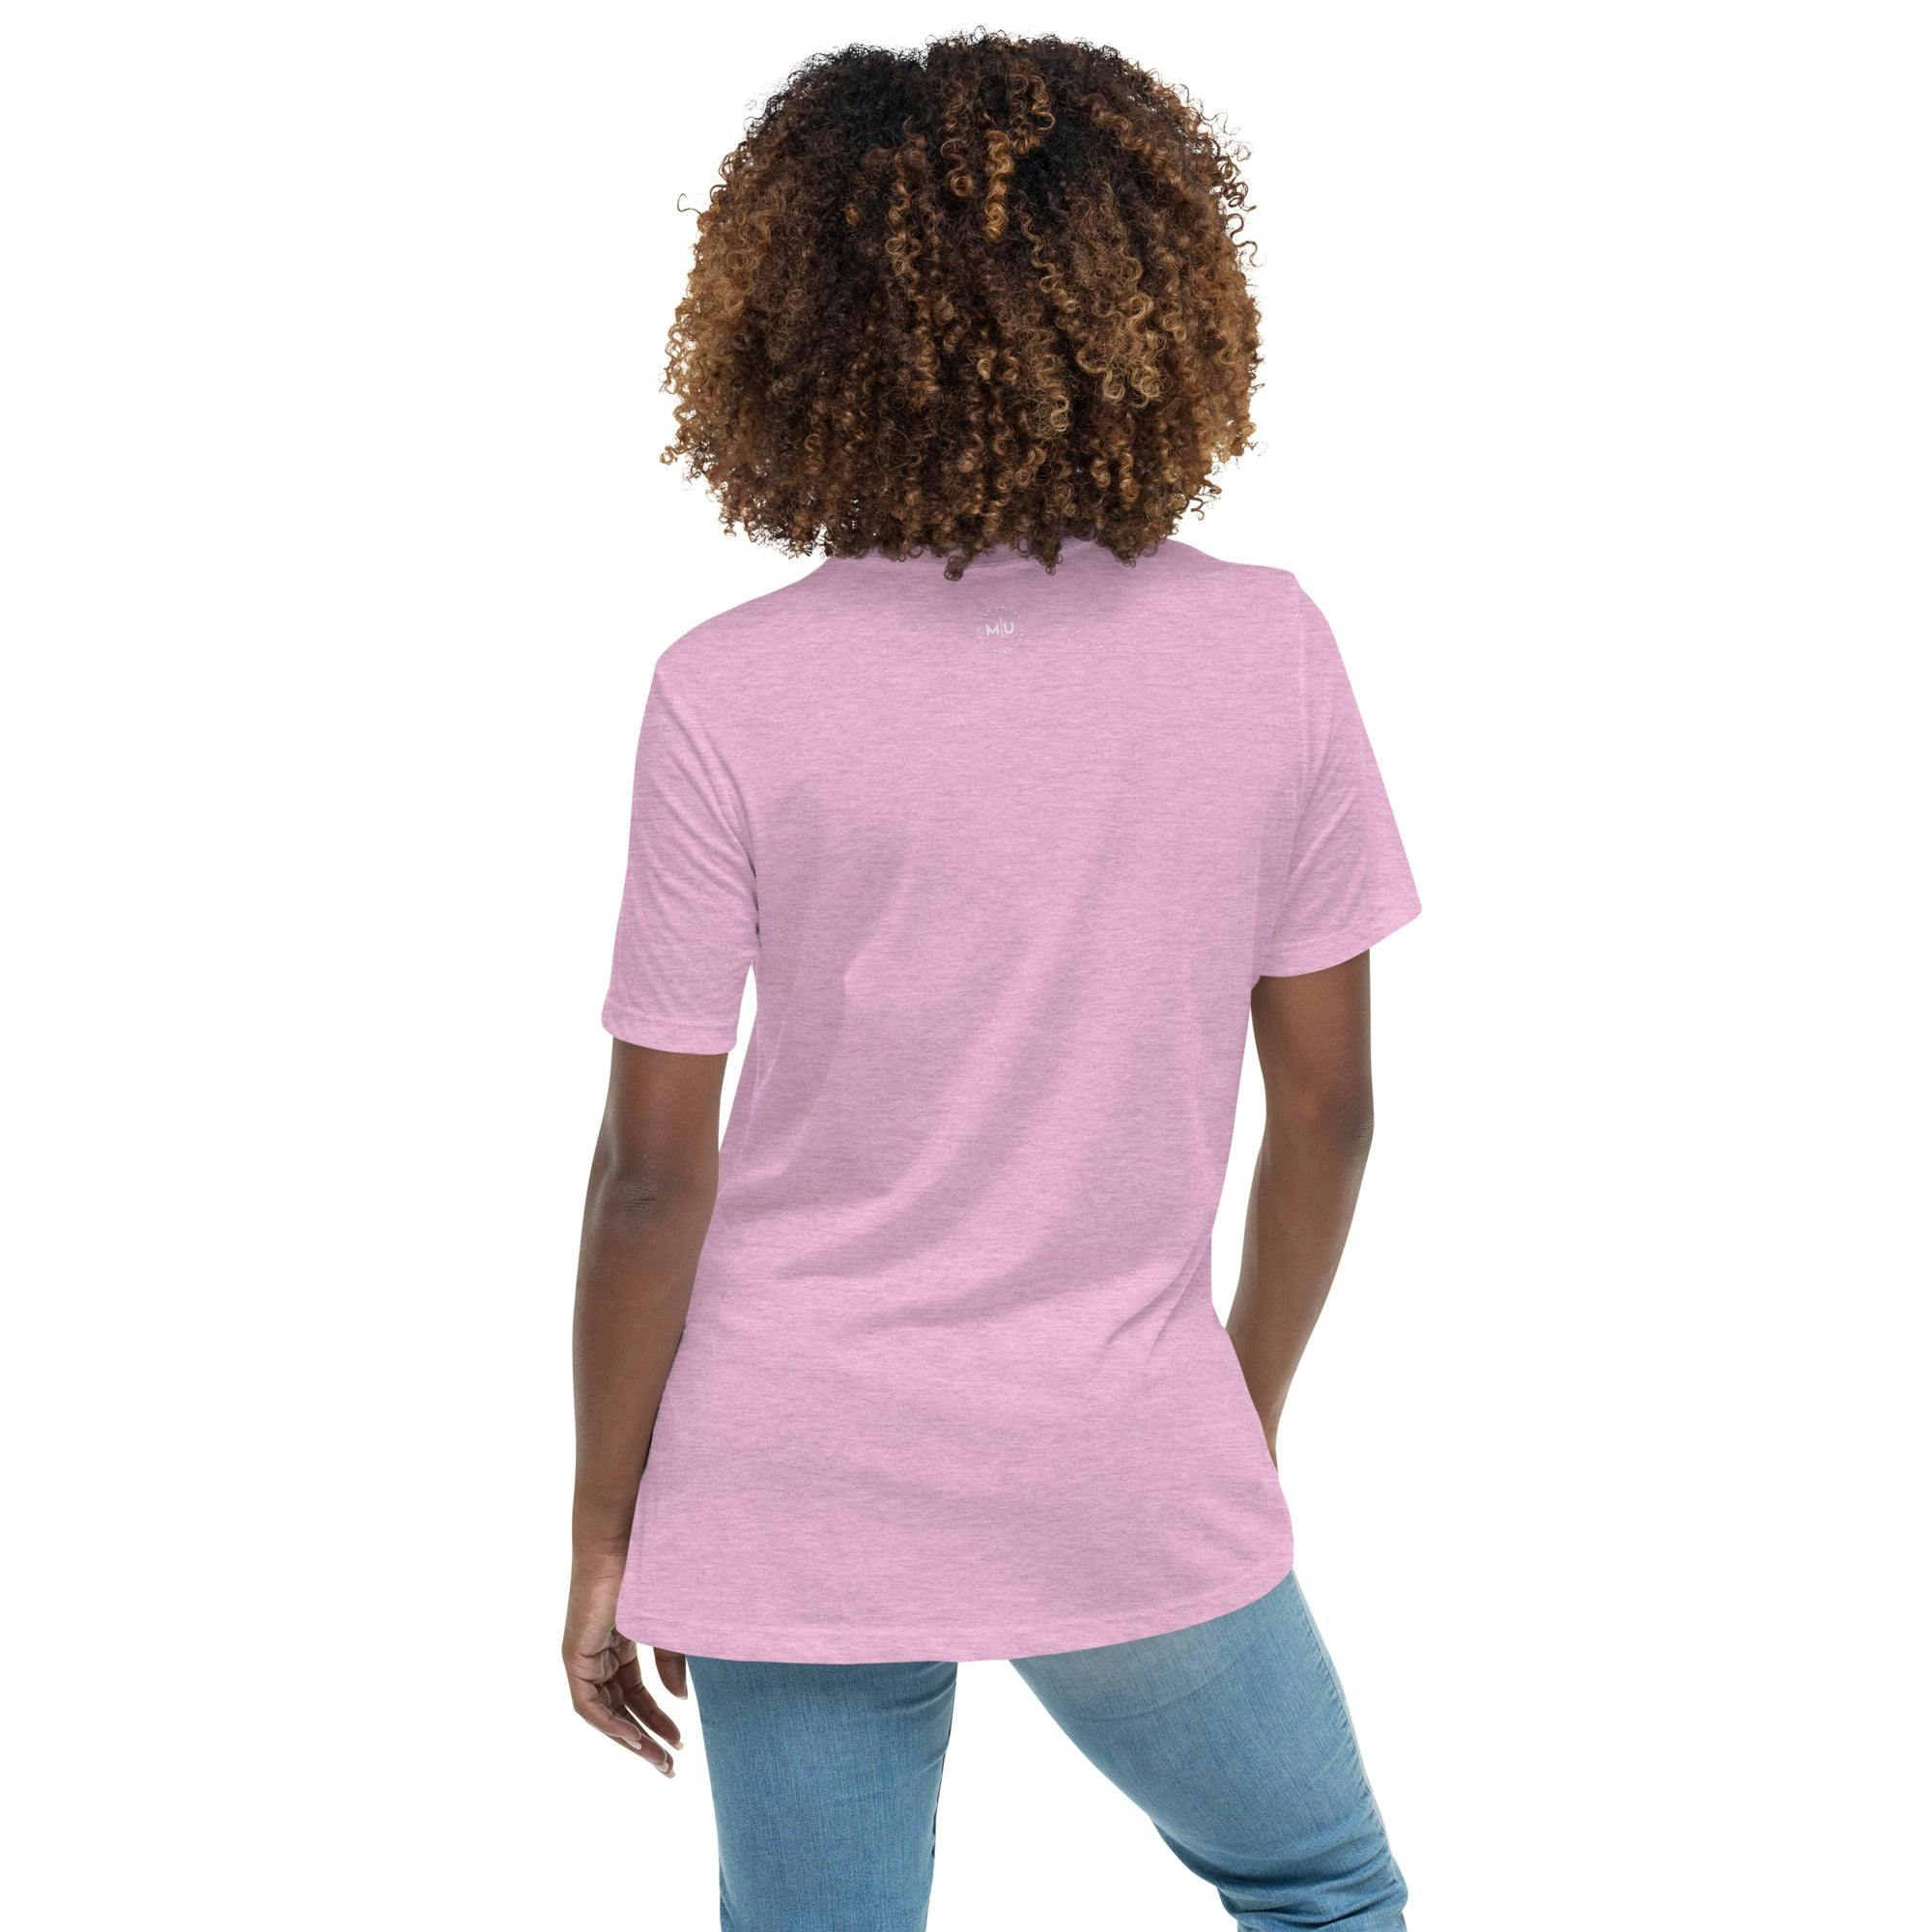 Women's Relaxed T-Shirt - womens-relaxed-t-shirt-heather-prism-lilac-back-653f0ed06ba65